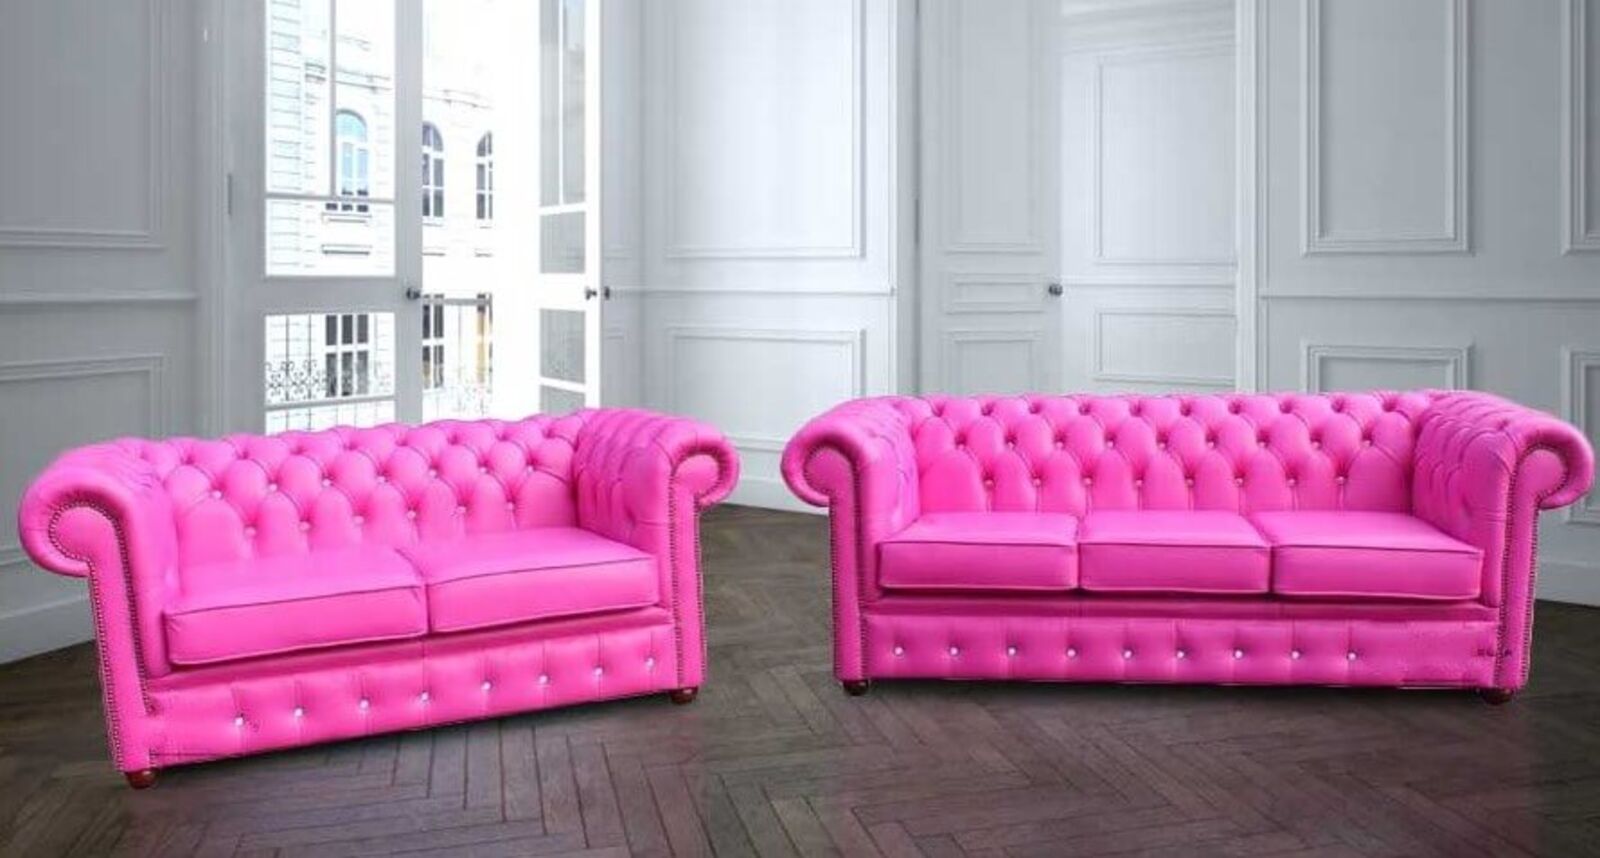 Product photograph of Chesterfield 3 2 Seater Crystallized Diamond Fuchsia Pink Leather Sofa Offer from Designer Sofas 4U